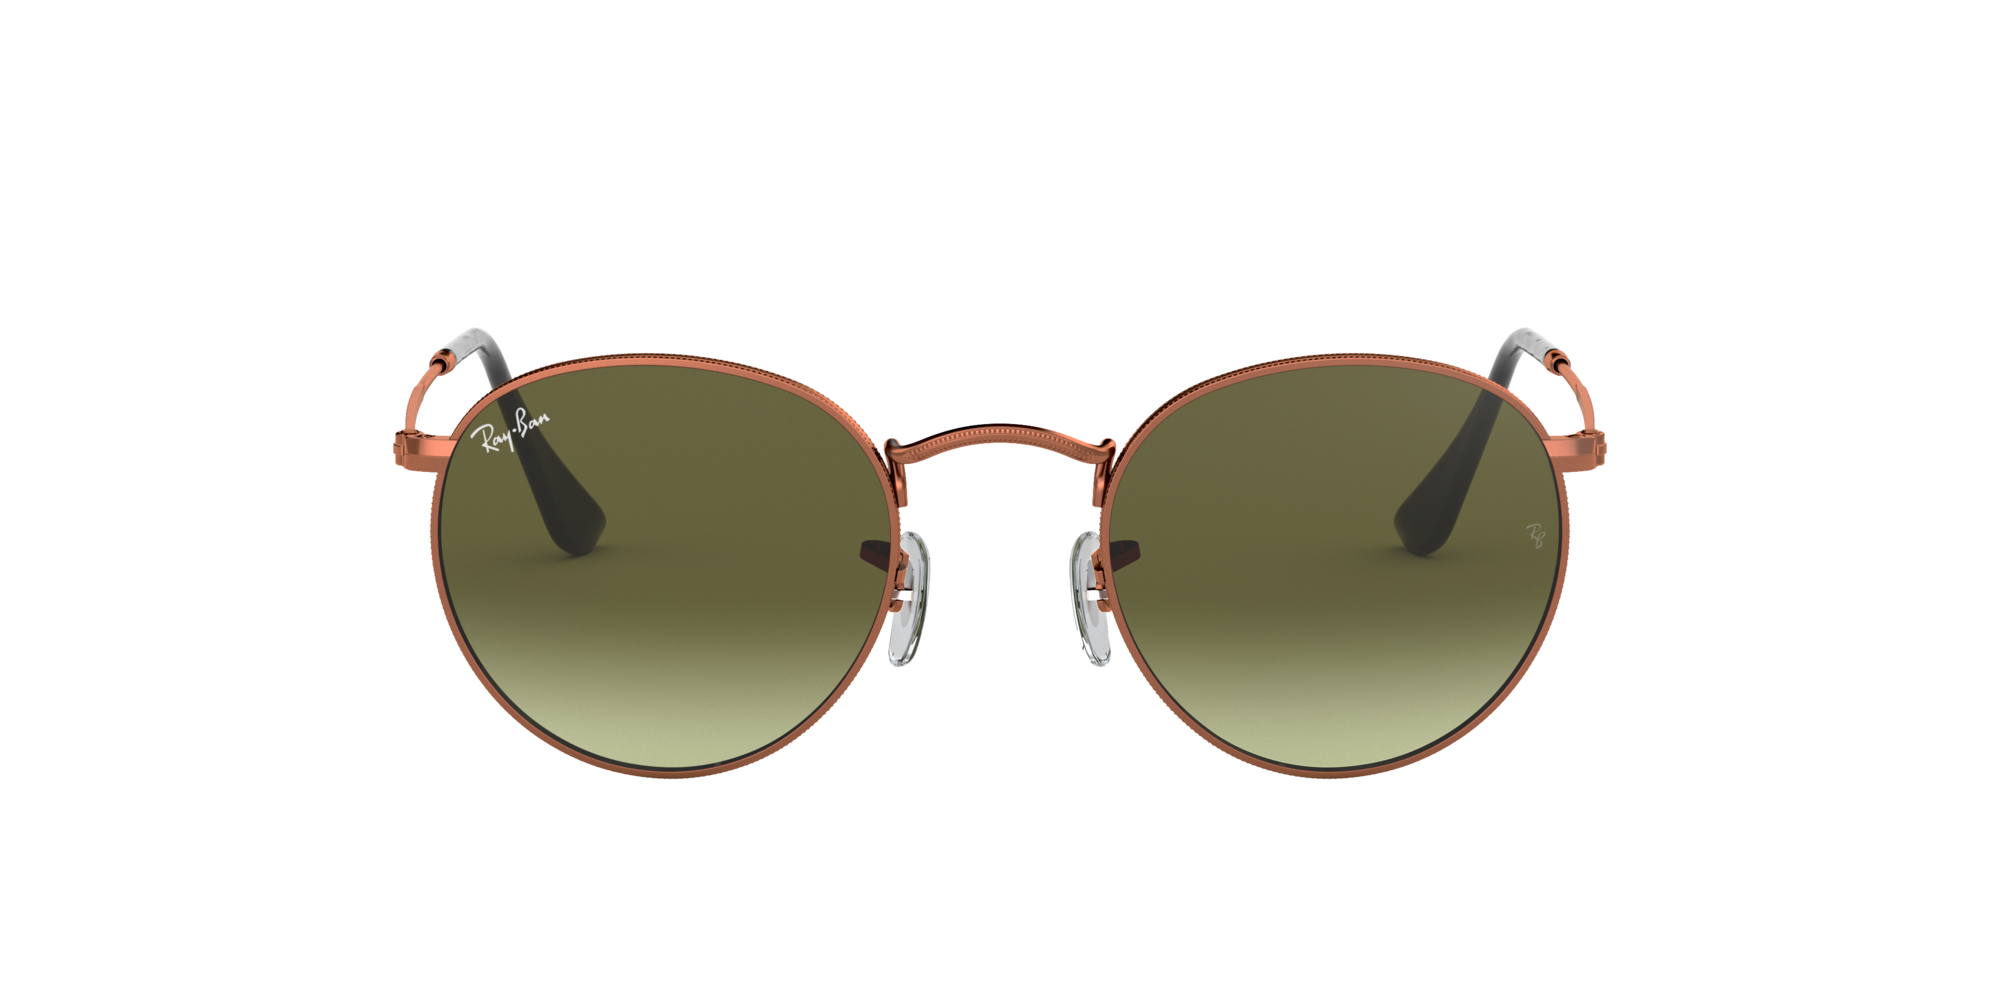 Ray Ban 0rb3447 Sunglasses In Copper Bronze Target Optical